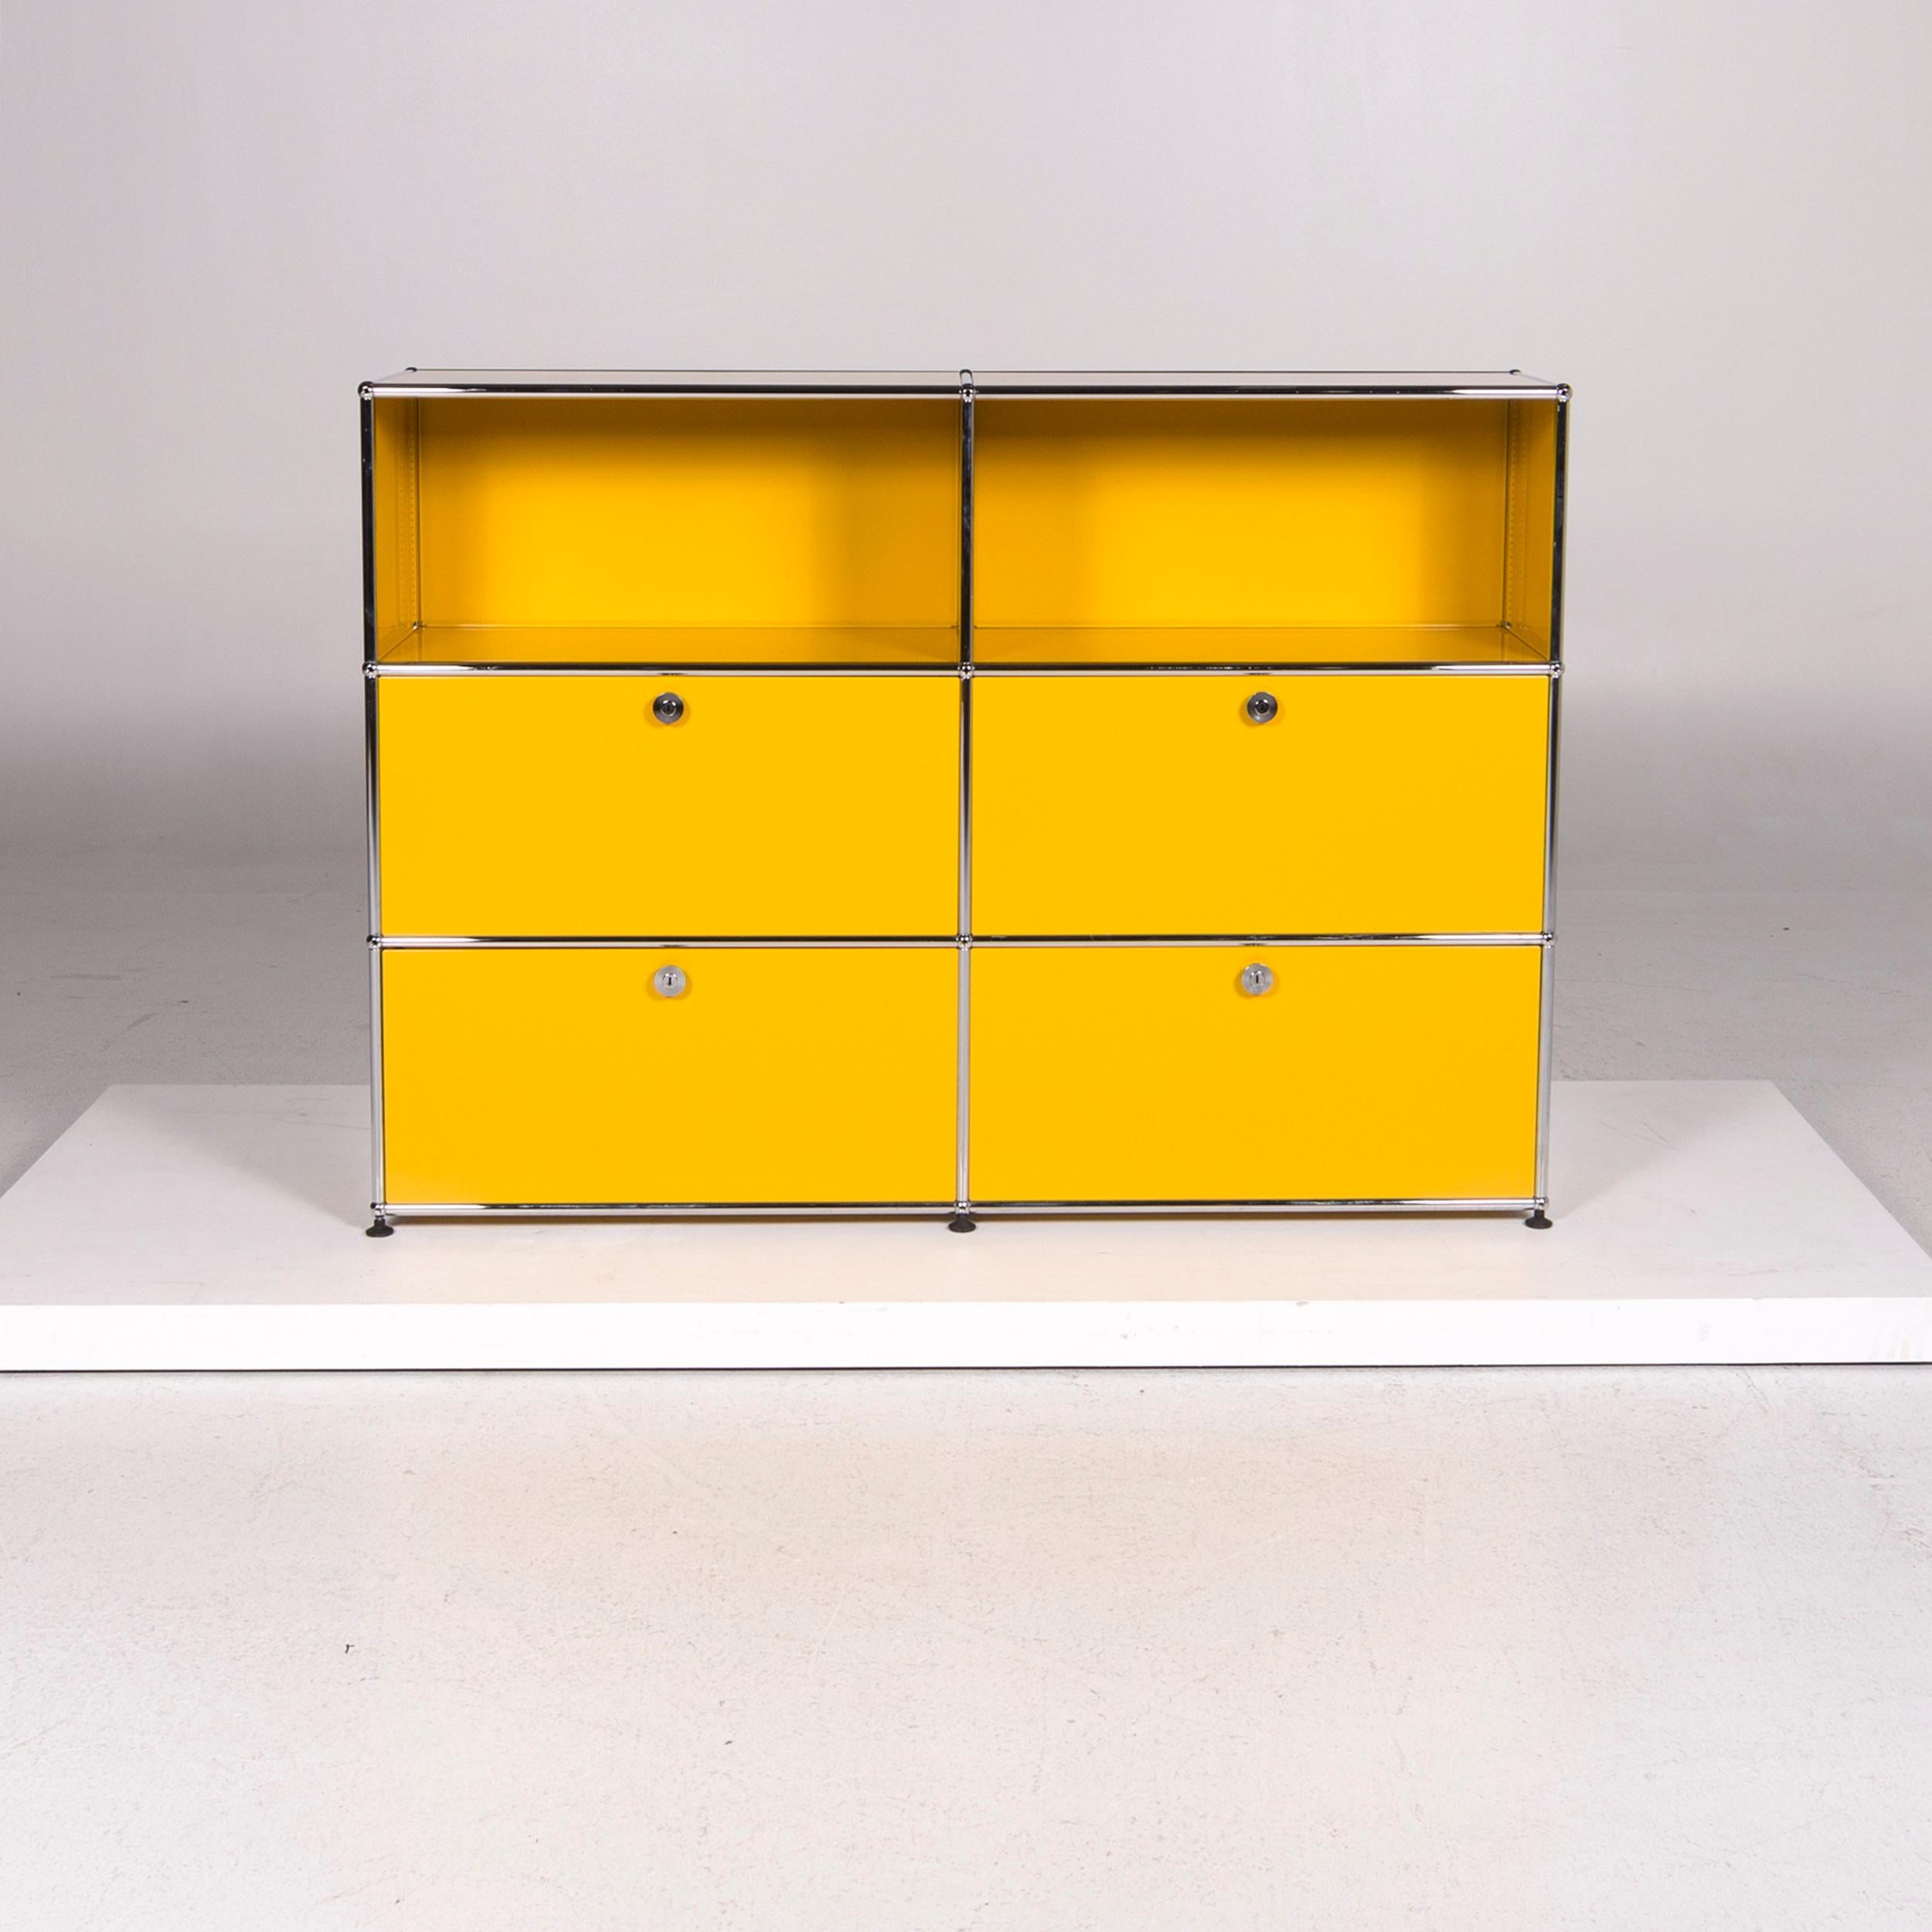 We bring to you an USM Haller Metal Sideboard Yellow Shelf Office Furniture.
 SKU: #11873
 

 Product Measurements in centimeters:
 

 depth: 38
 width: 153
 height: 109
 seat-height: 
 rest-height: 
 seat-depth: 
 seat-width: 
